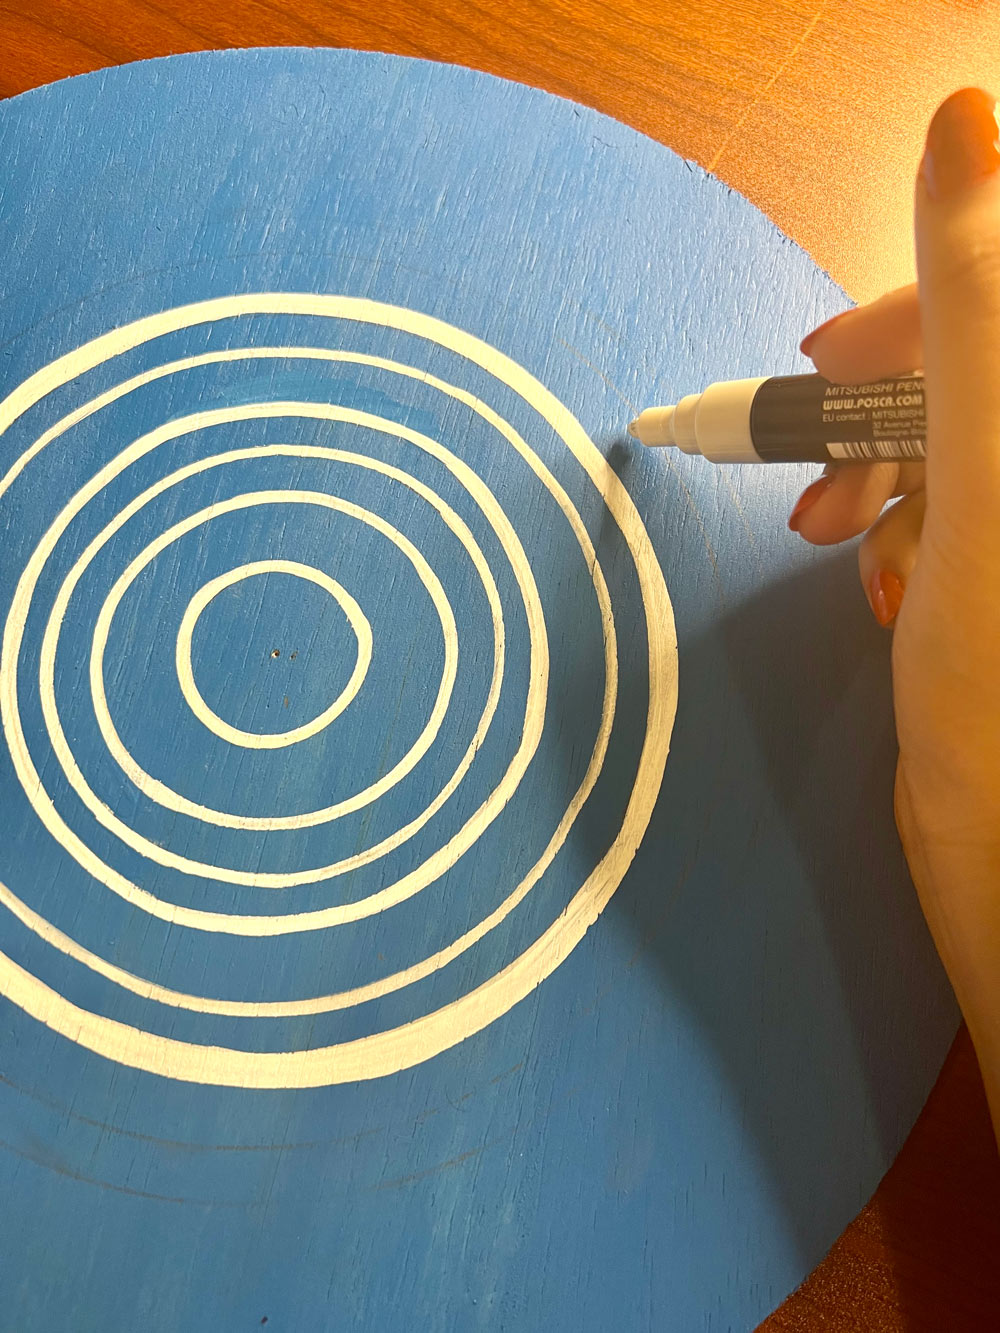 Person using a Posca marker to paint white circles on a wooden circle.